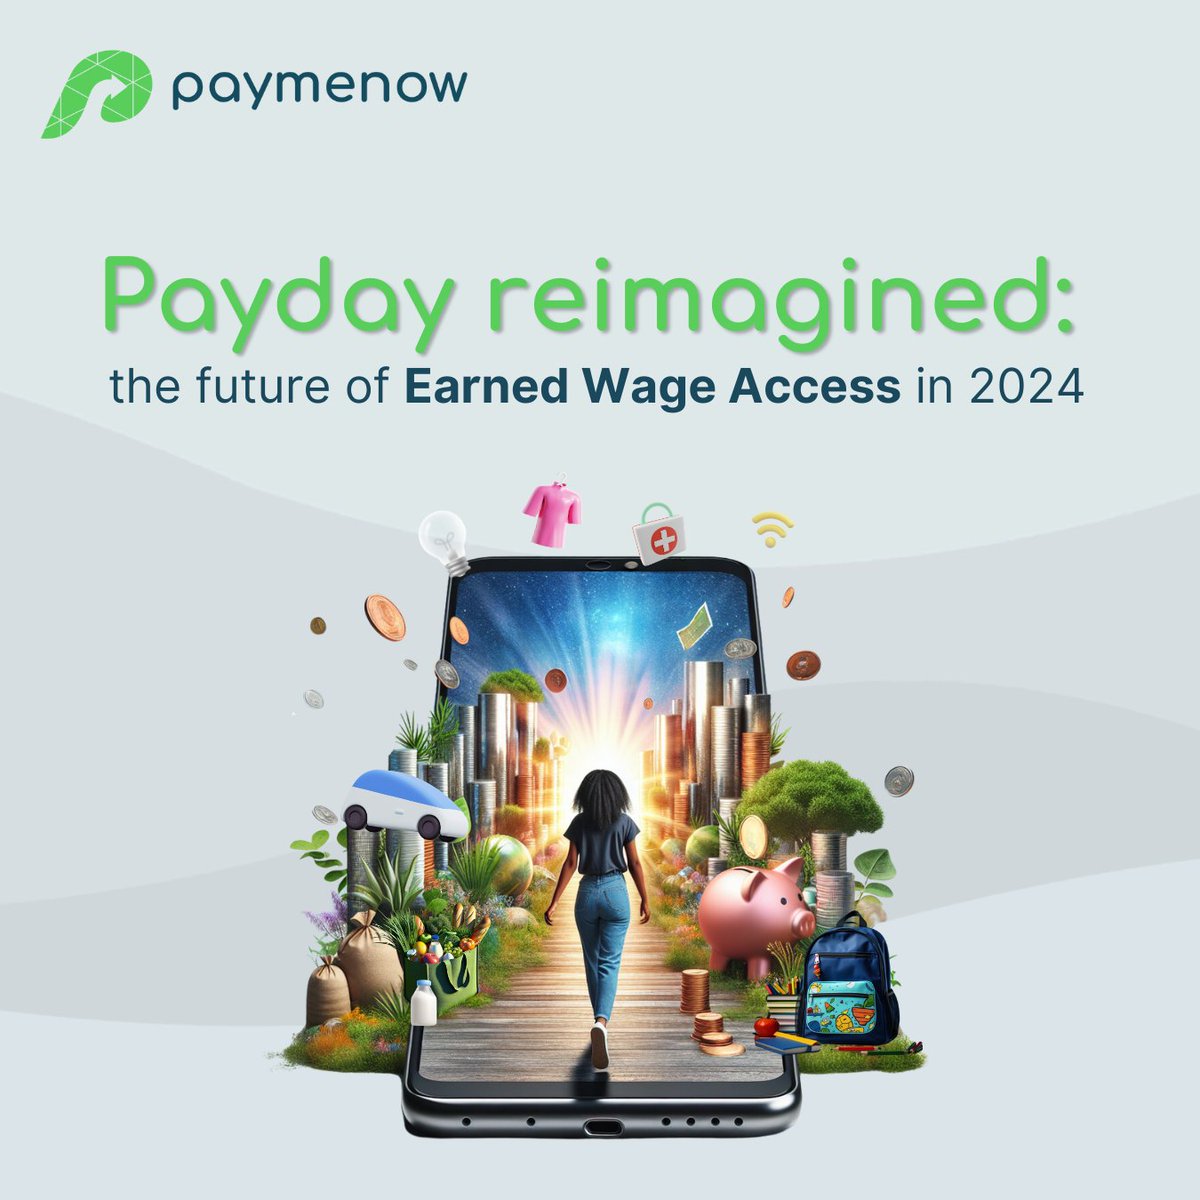 Payday reimagined: the future of earned-wage access in 2024

Read our latest press release and discover the future of earned-wage access in 2024: paymenow.live/future-of-earn…

#2020MORE #financialwellness #earnedwageaccess #EWA #trends2024  #ondemandpay #Paymenow